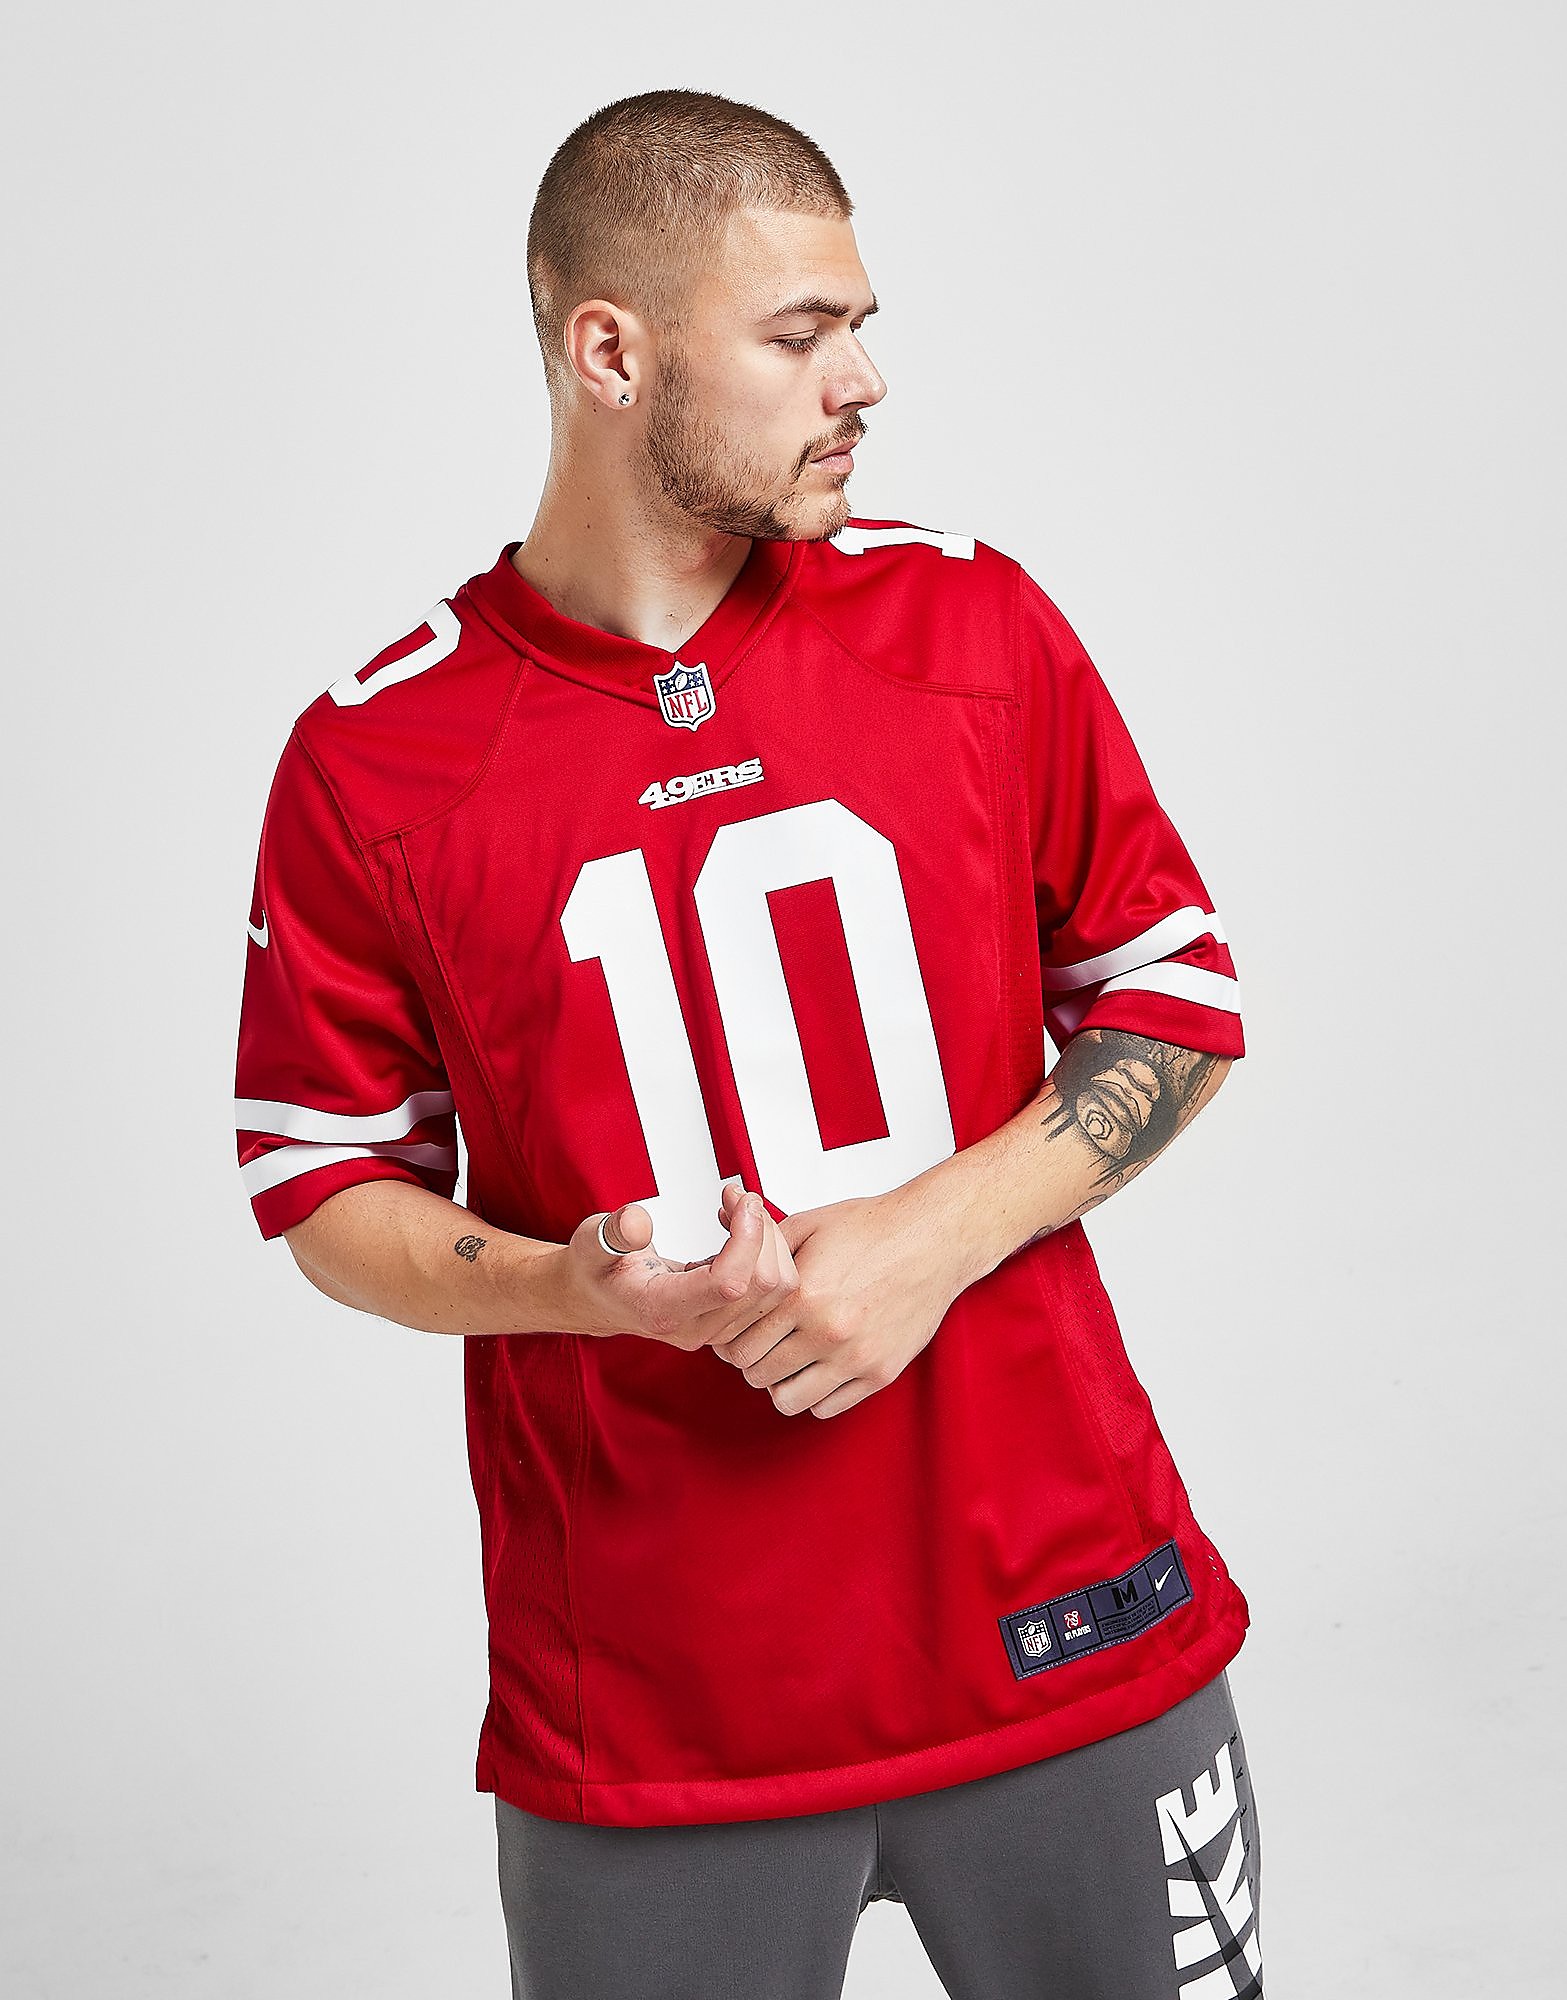 

Nike NFL San Francisco 49ers Garoppolo #10 Jersey - Red - Mens, Red